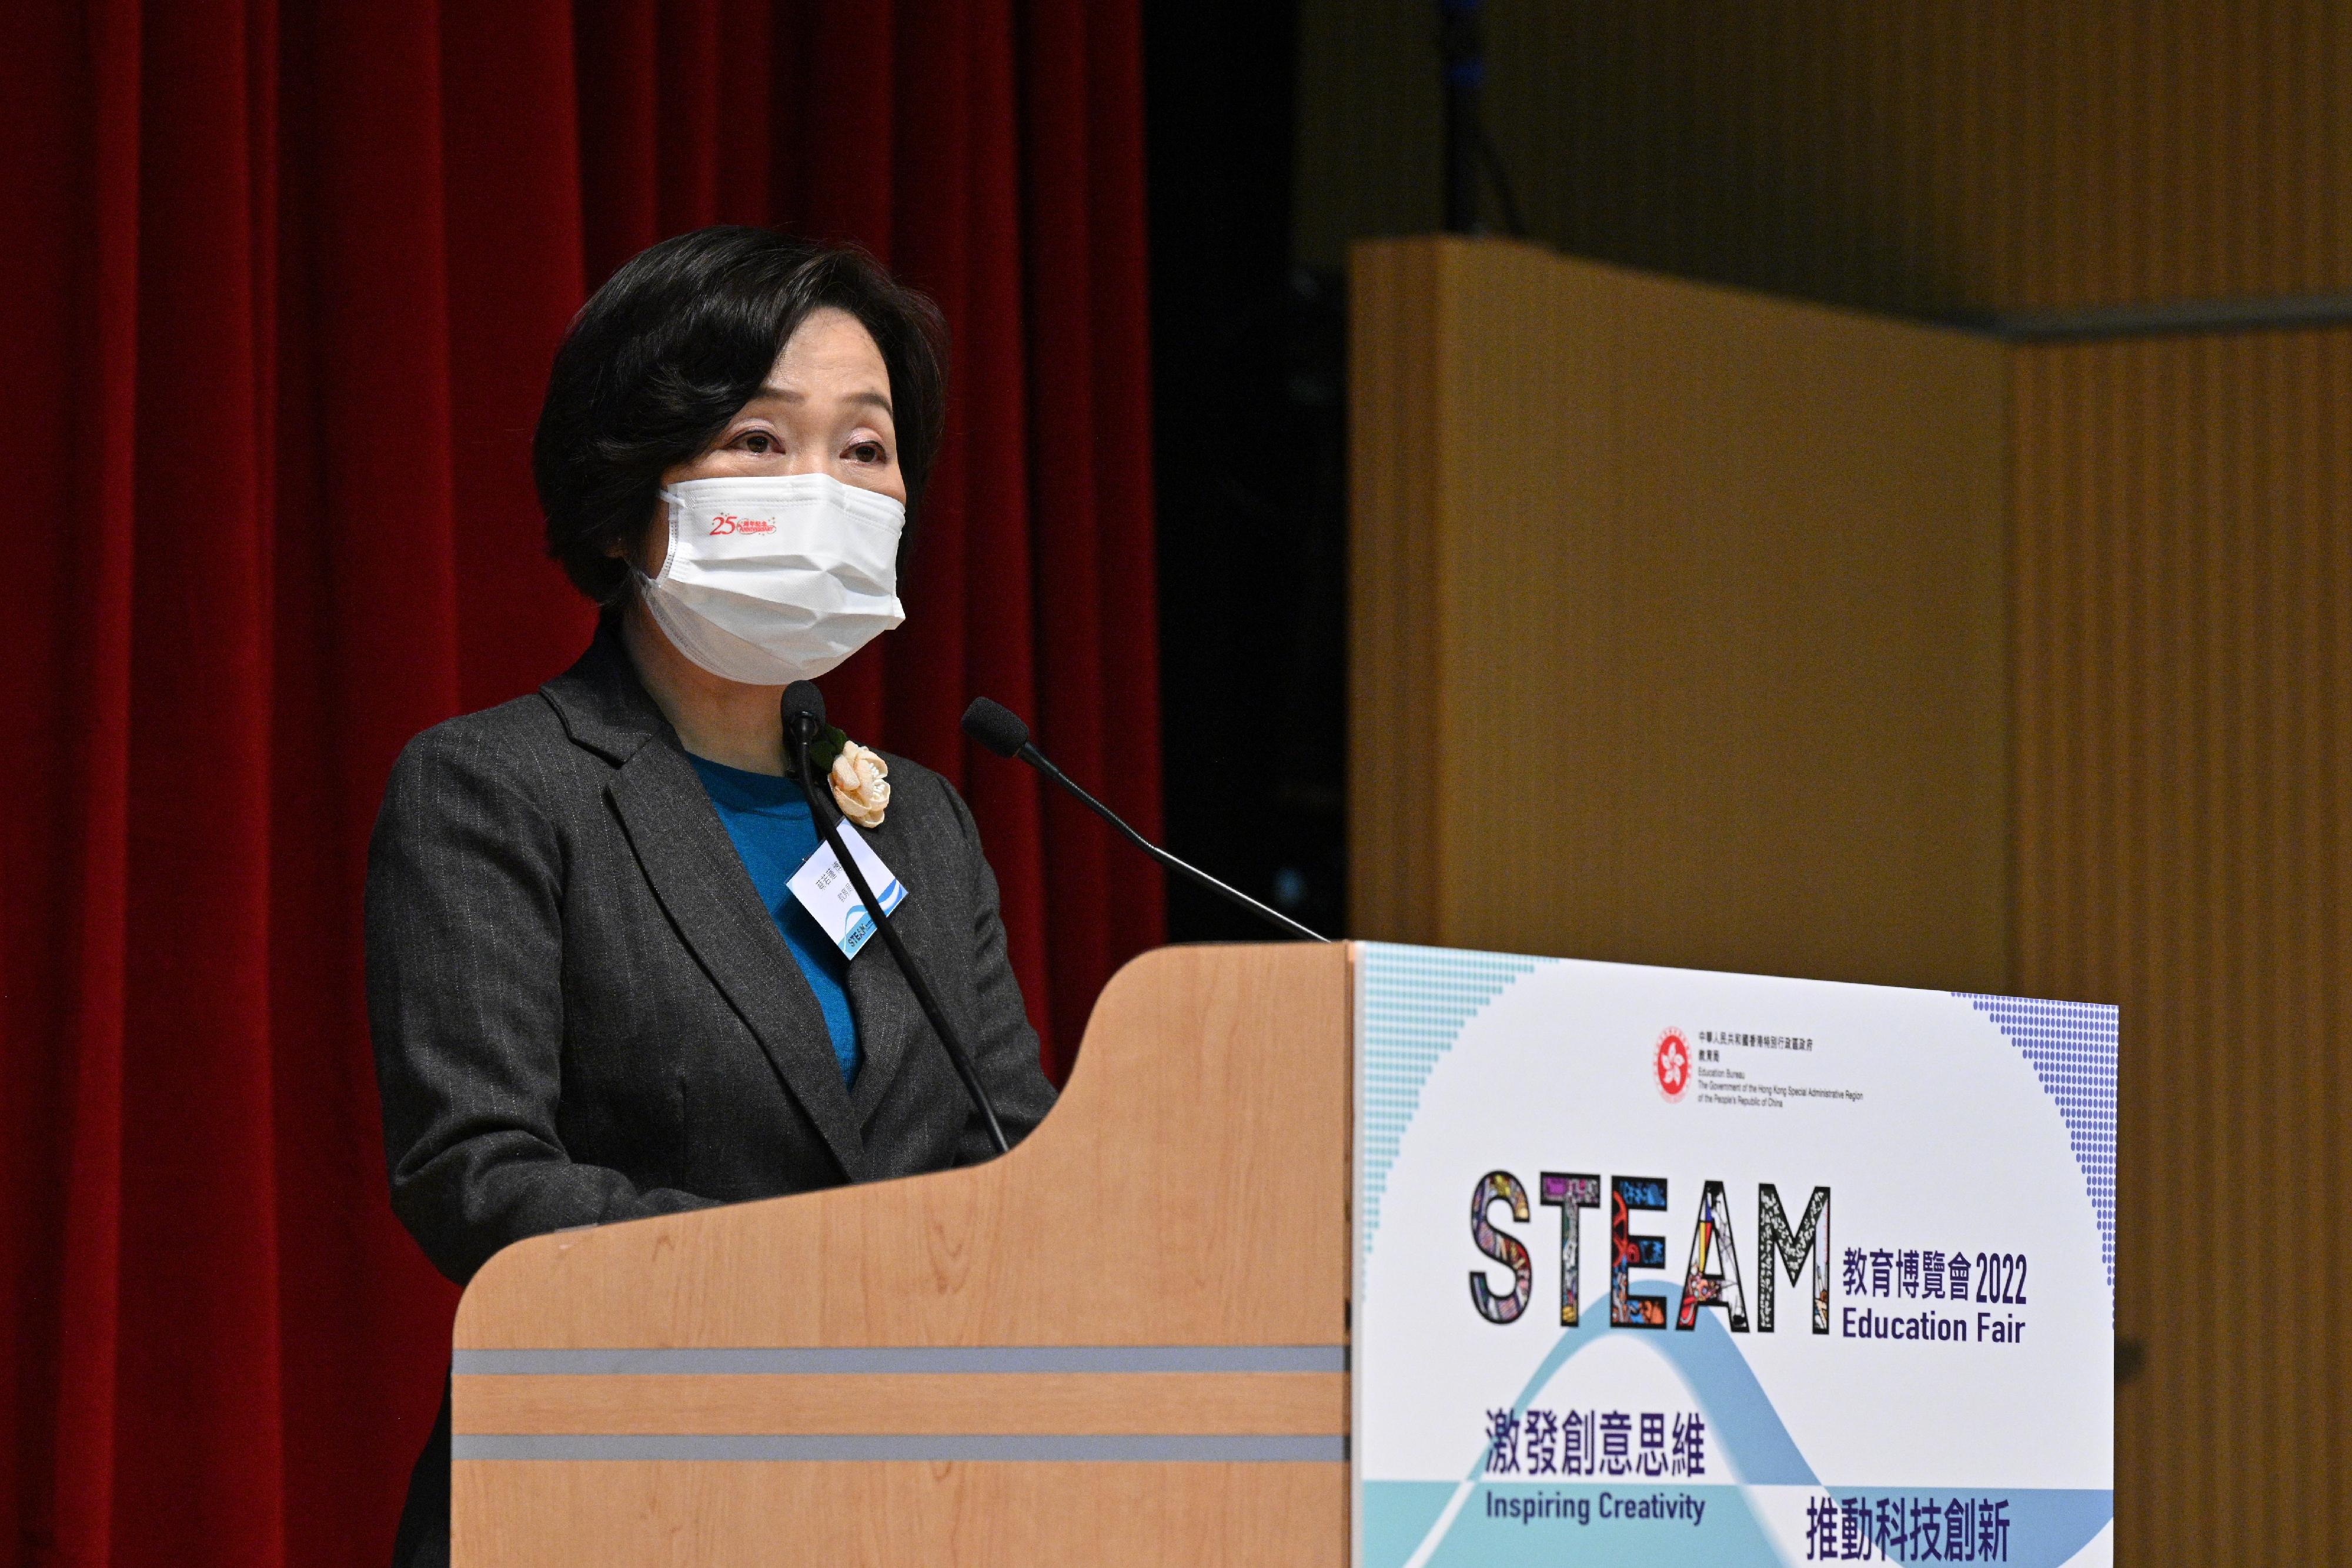 The Secretary for Education, Dr Choi Yuk-lin, speaks at the opening ceremony of the STEAM Education Fair 2022 organised by the Education Bureau today (November 26).